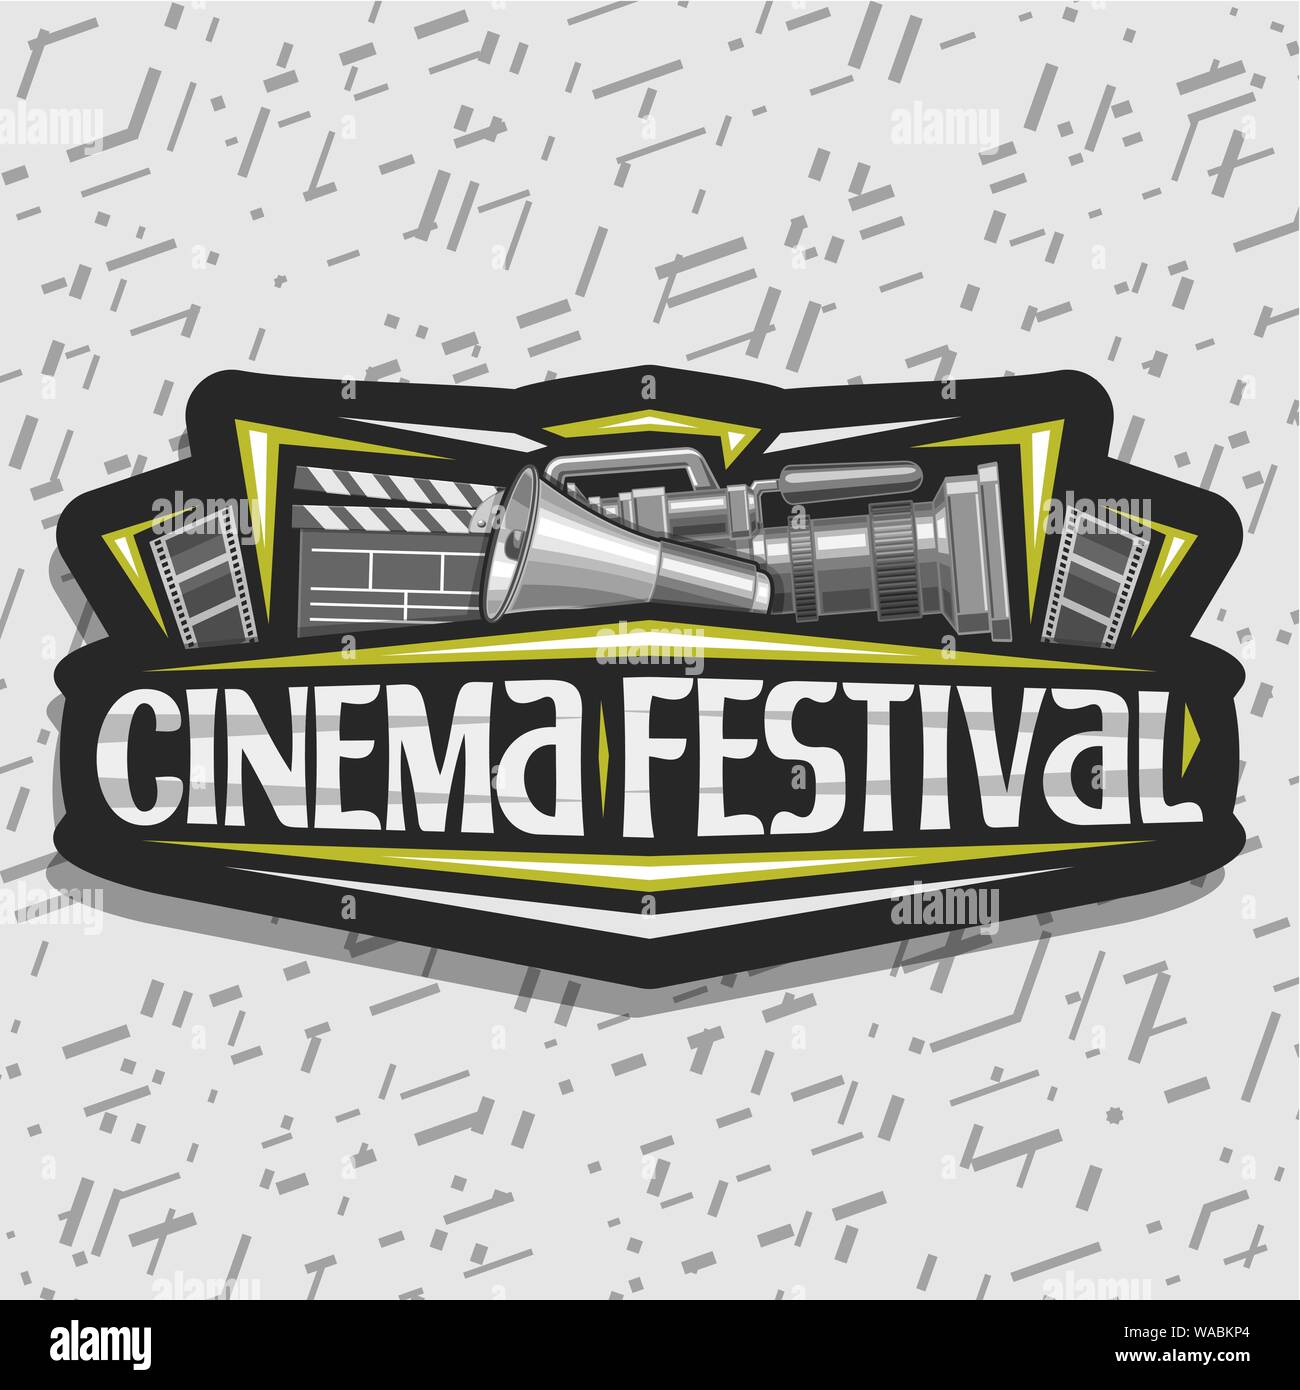 Vector logo for Cinema Festival, black decorative signage with professional film equipment, speaking trumpet, lettering for words cinema festival, ill Stock Vector